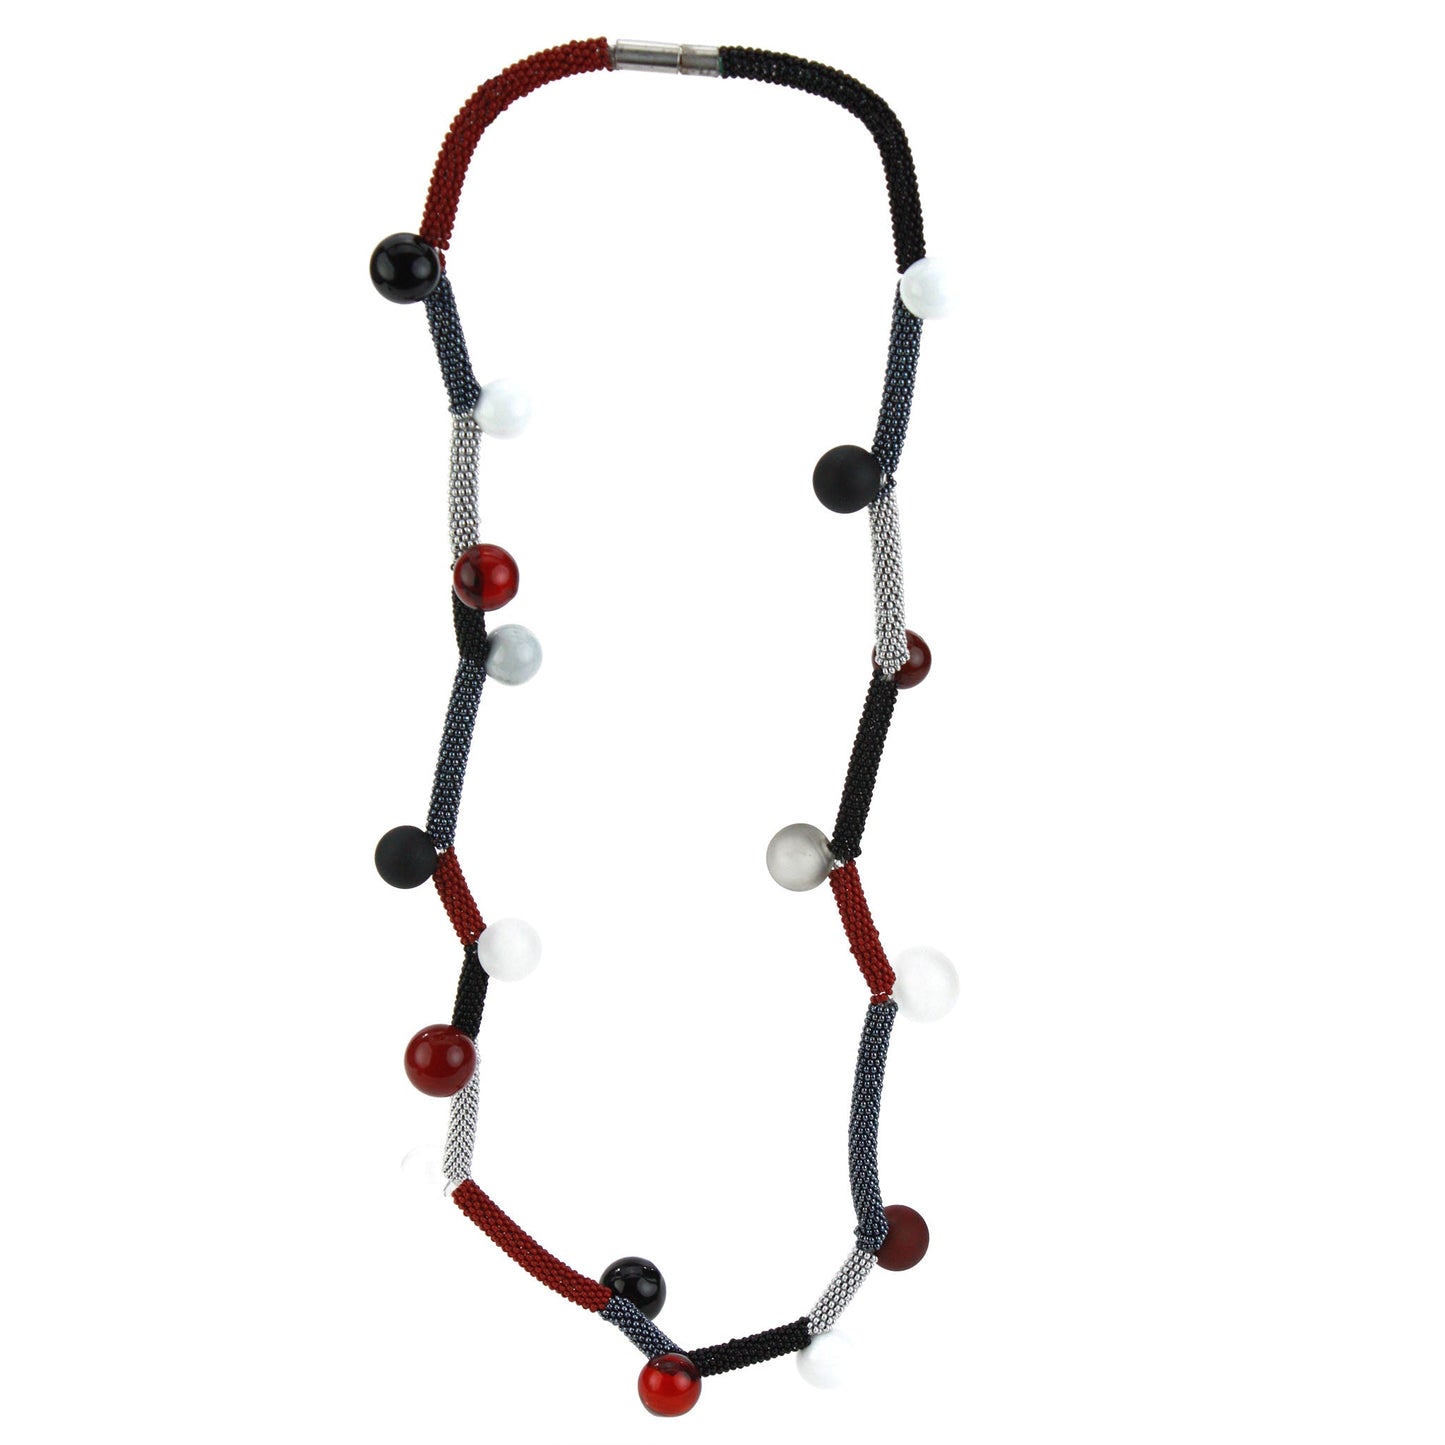 Bolla Zig Zag necklace - black, white and red